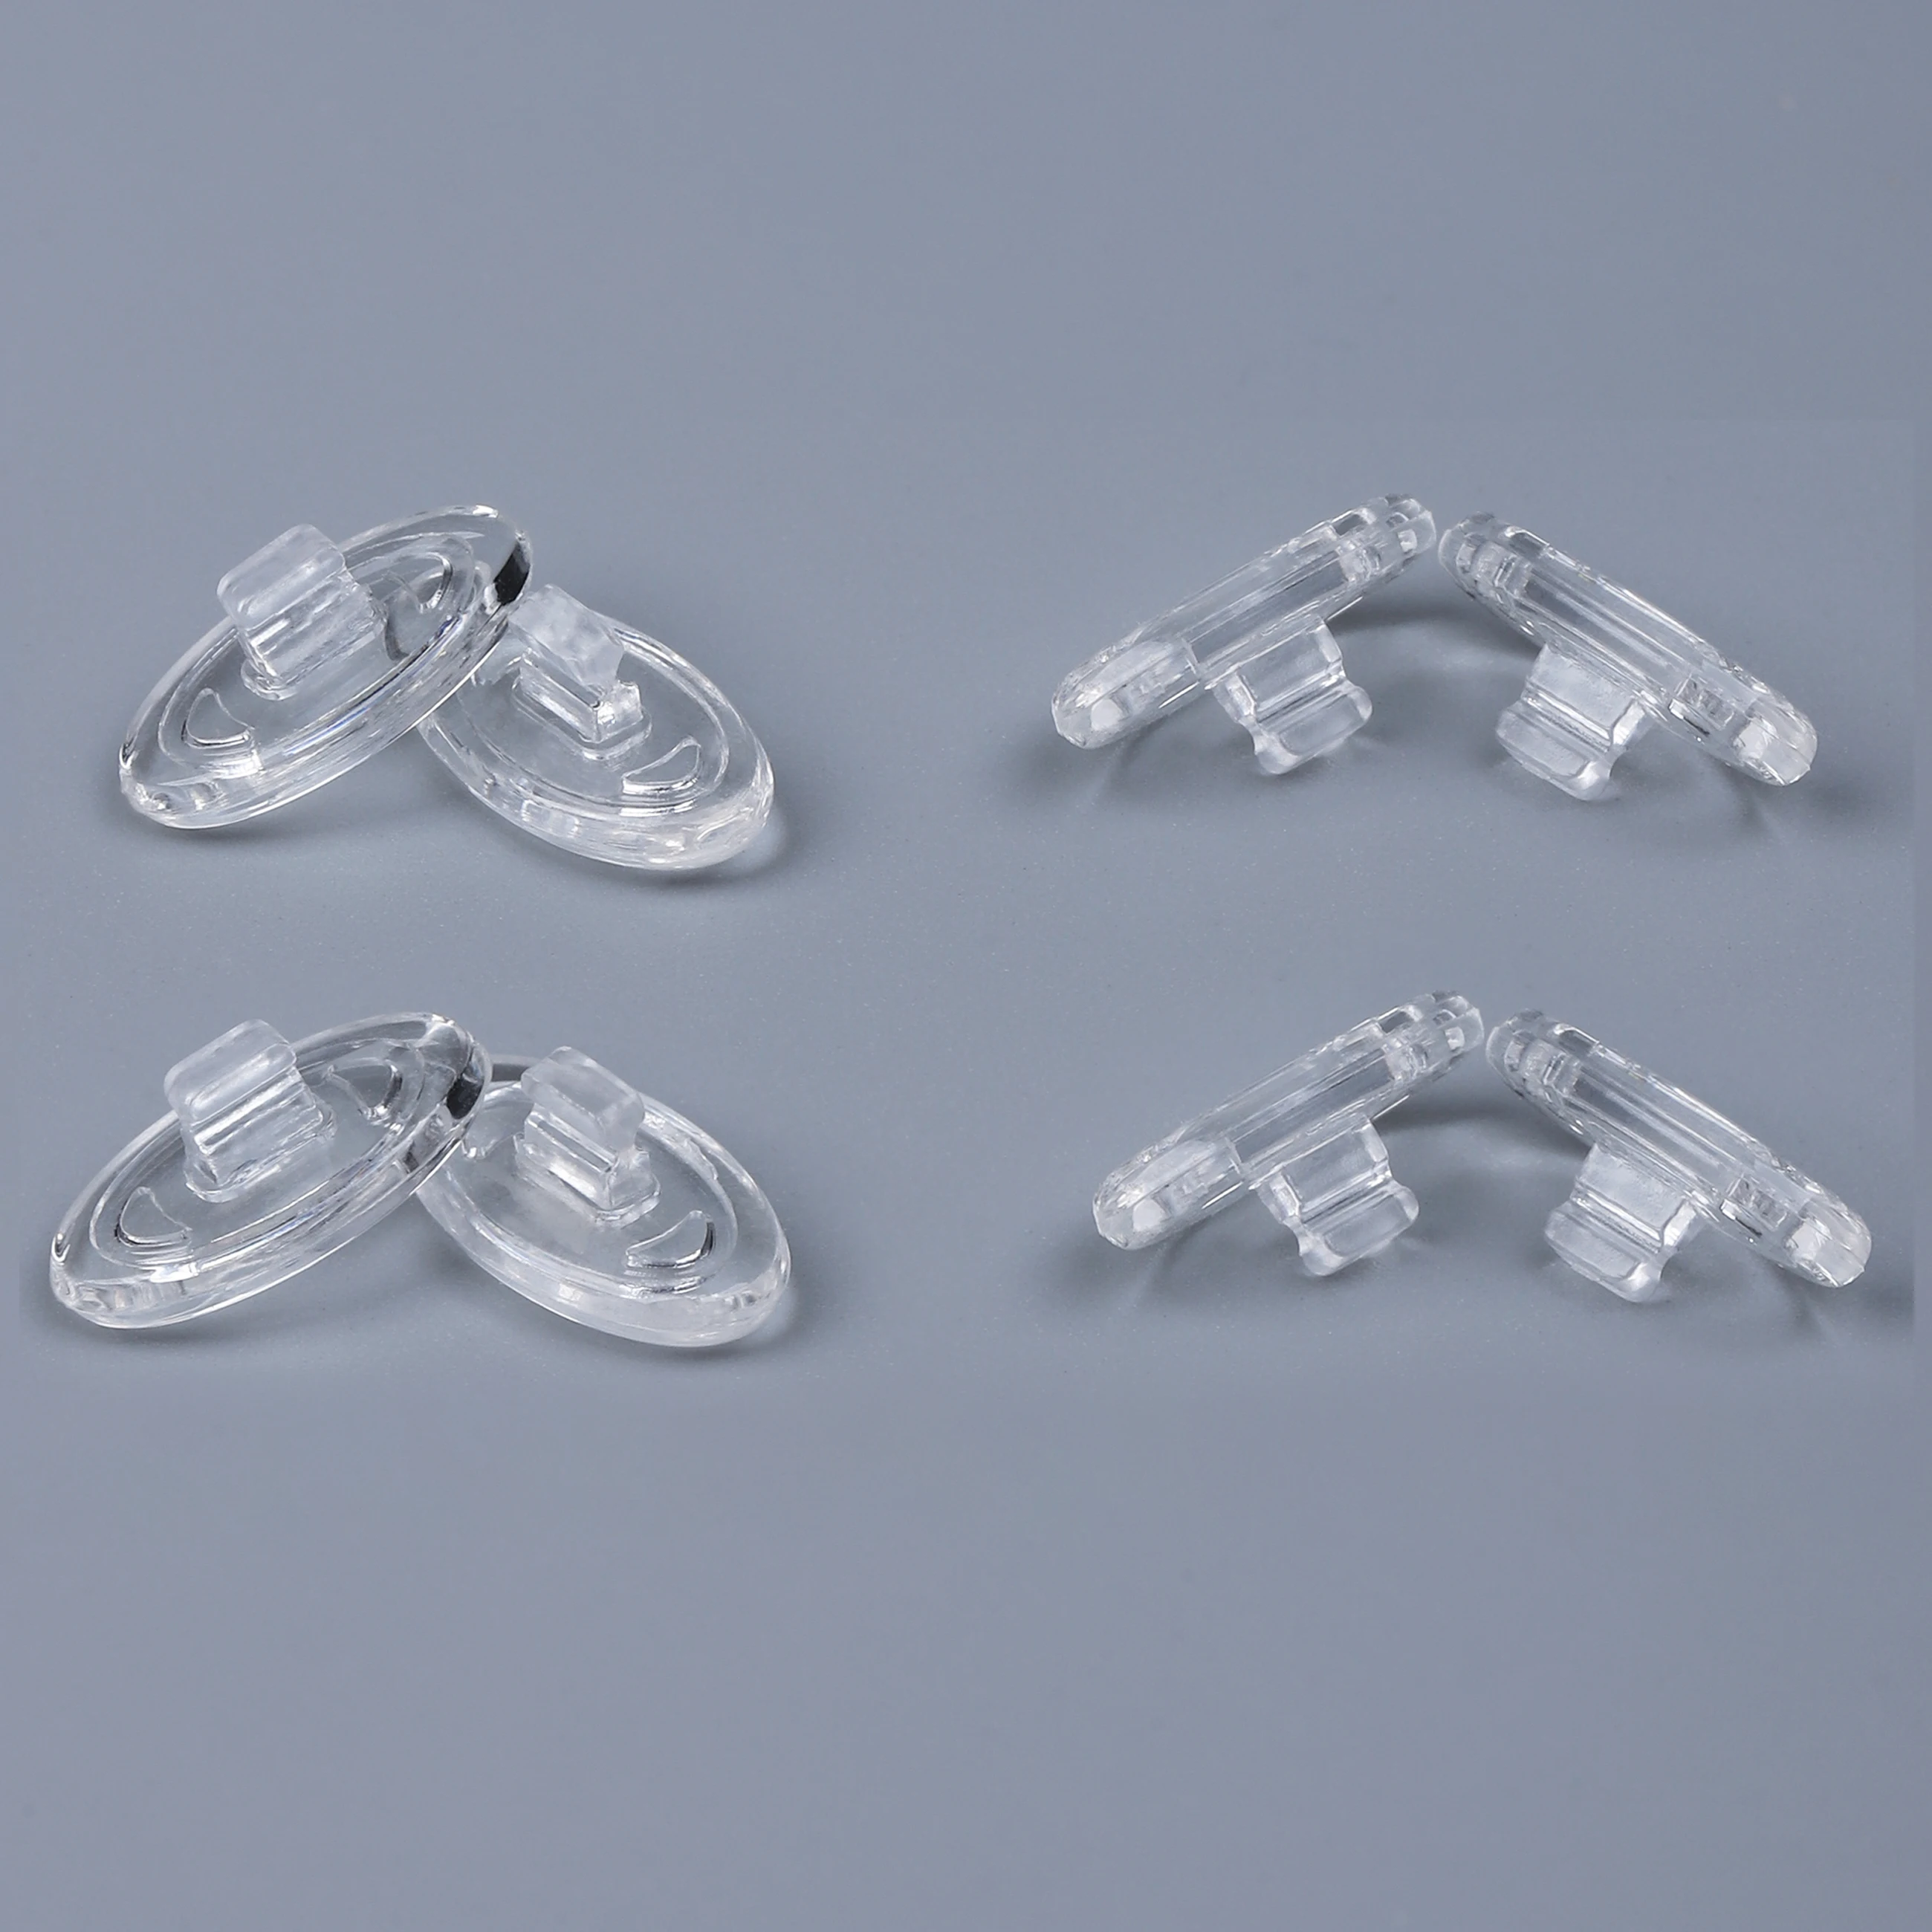 

E.O.S Silicon Rubber Replacement Clear Nose Pads for Spy Optic Whistler Frame Multi-Options